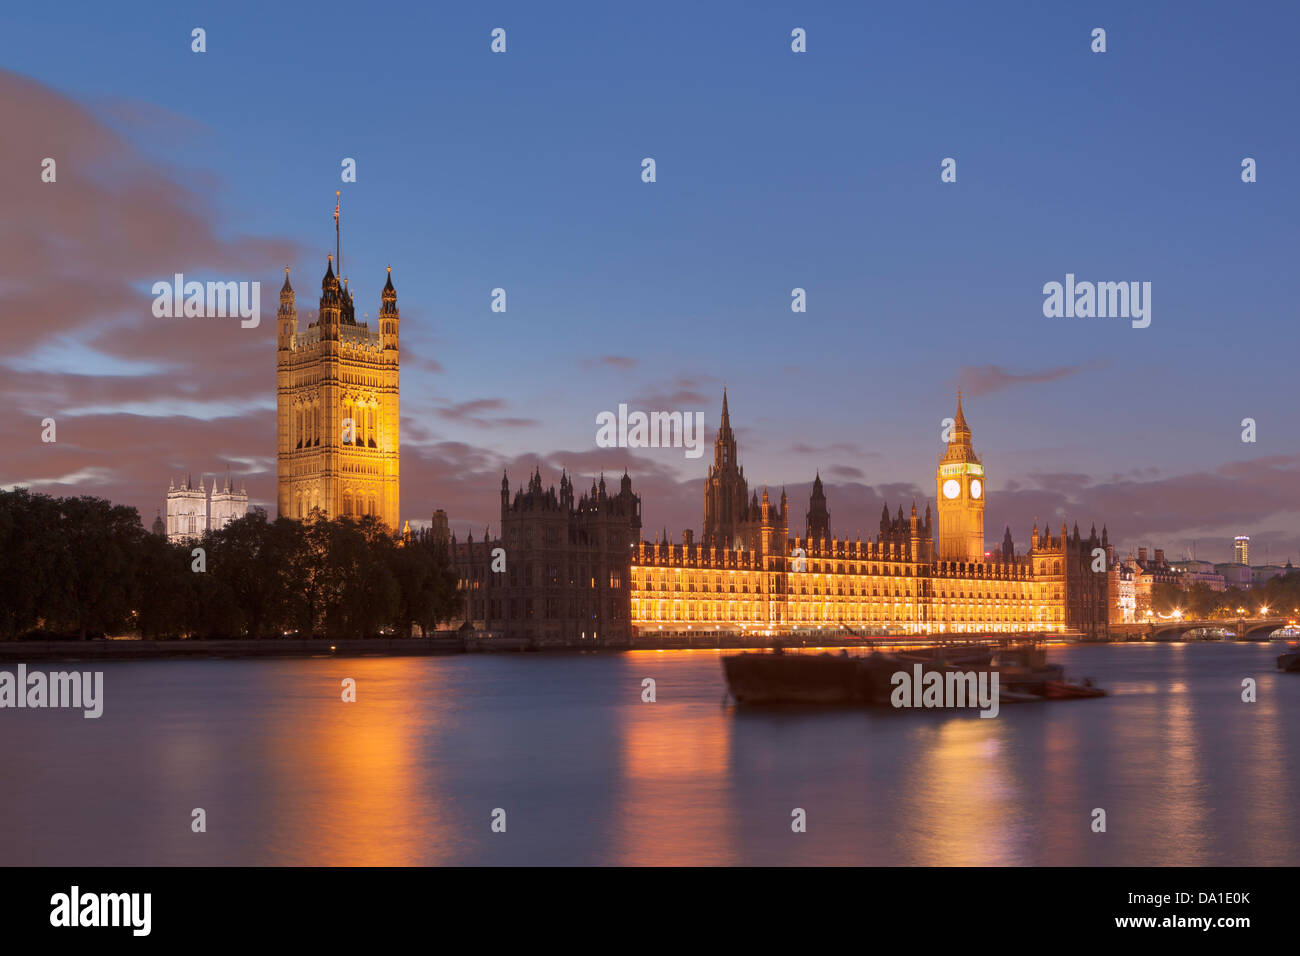 The house of parliament at night, London, UK Stock Photo